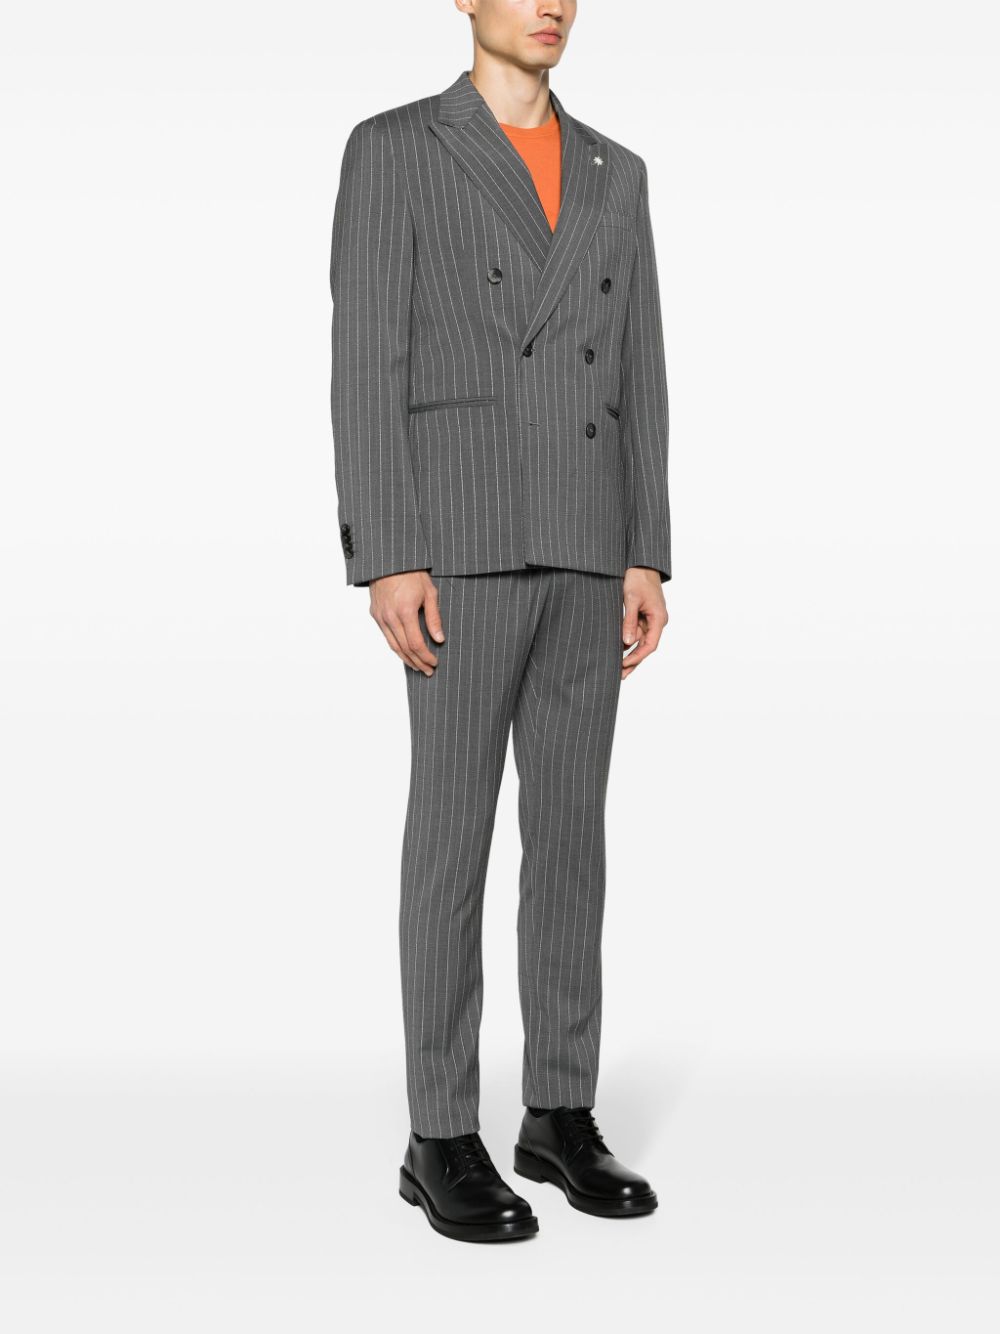 Double-breasted gray pinstripe suit